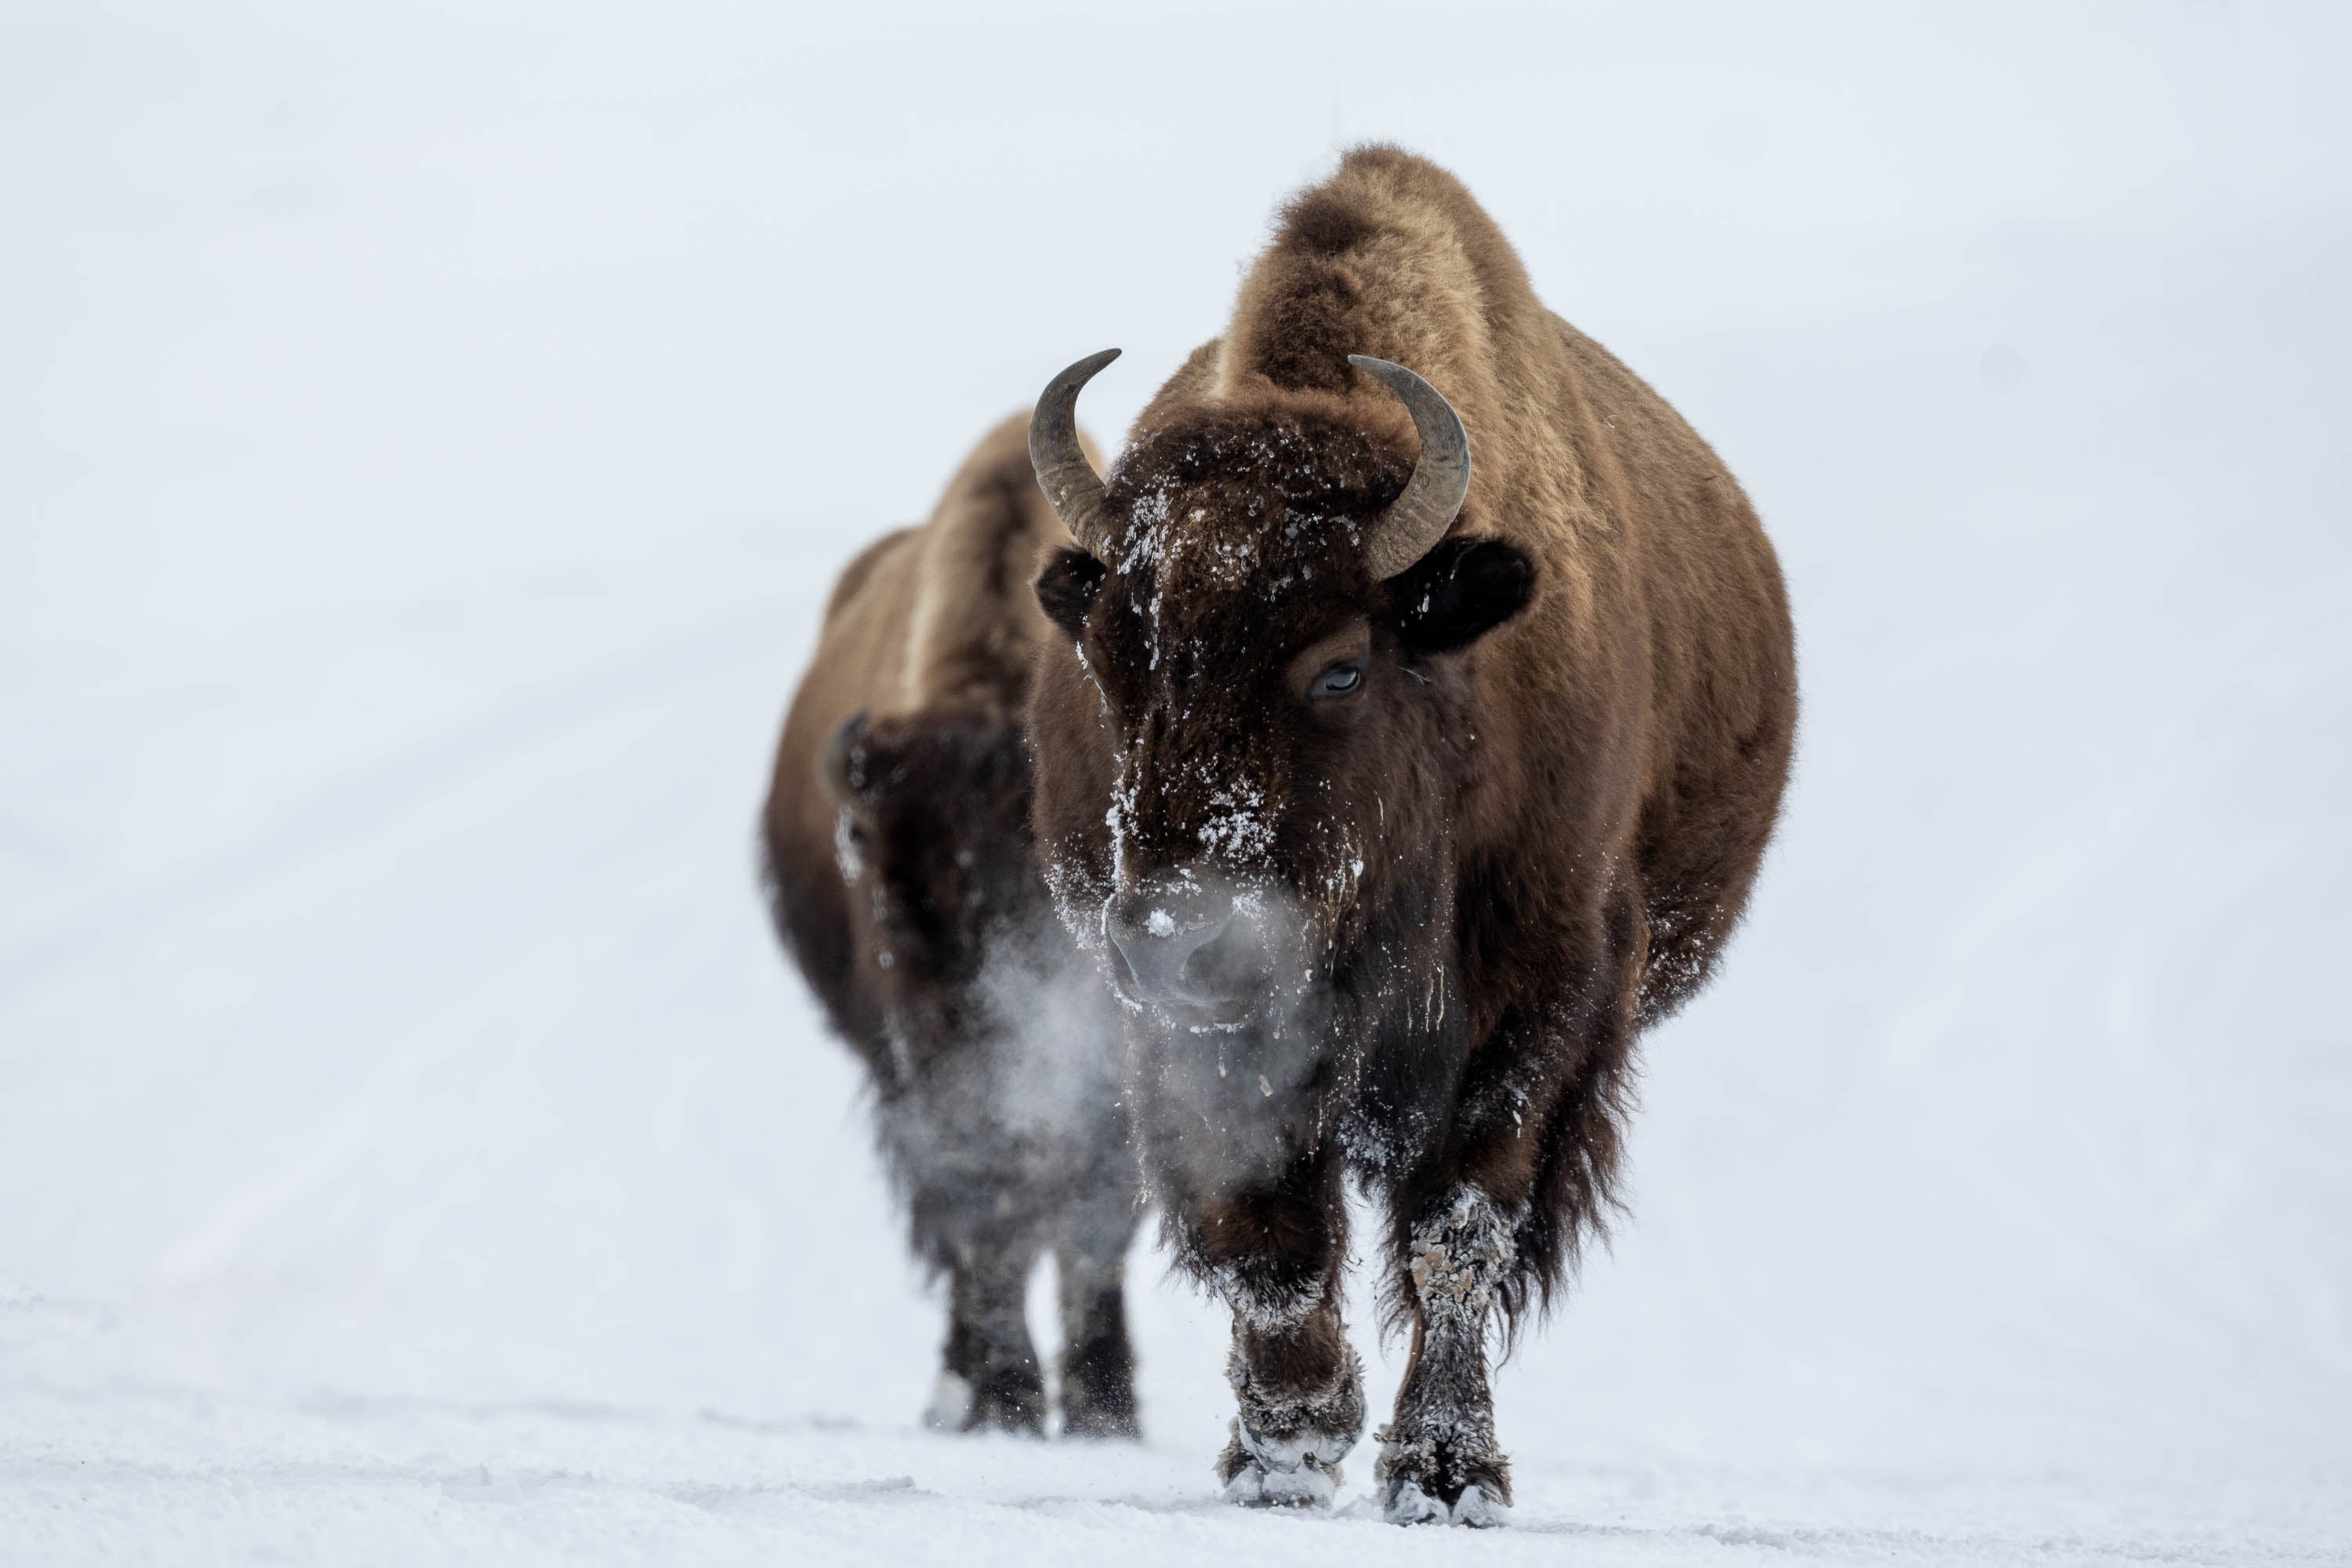 The Bison blowing off steam, Yellowstone NP